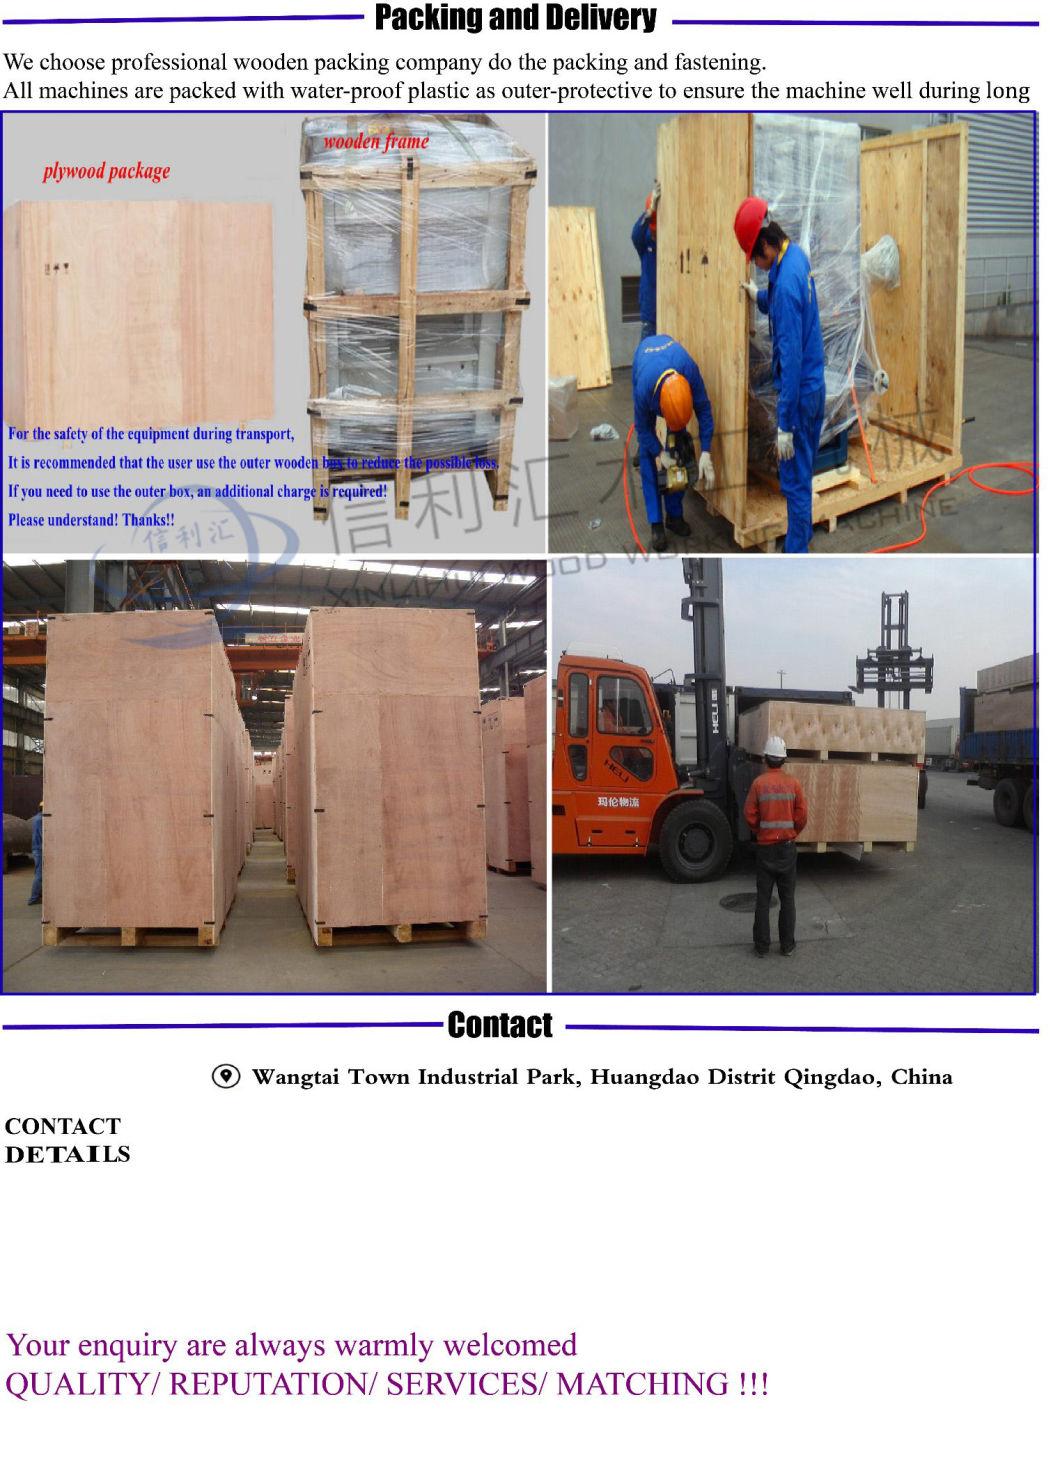 Particle Board/ MDF Short Cycle Melamine Hot Press (double side) Machine/ Short Cycle Lamination Hot Press Machine for Melamine Board Particle Board Machine